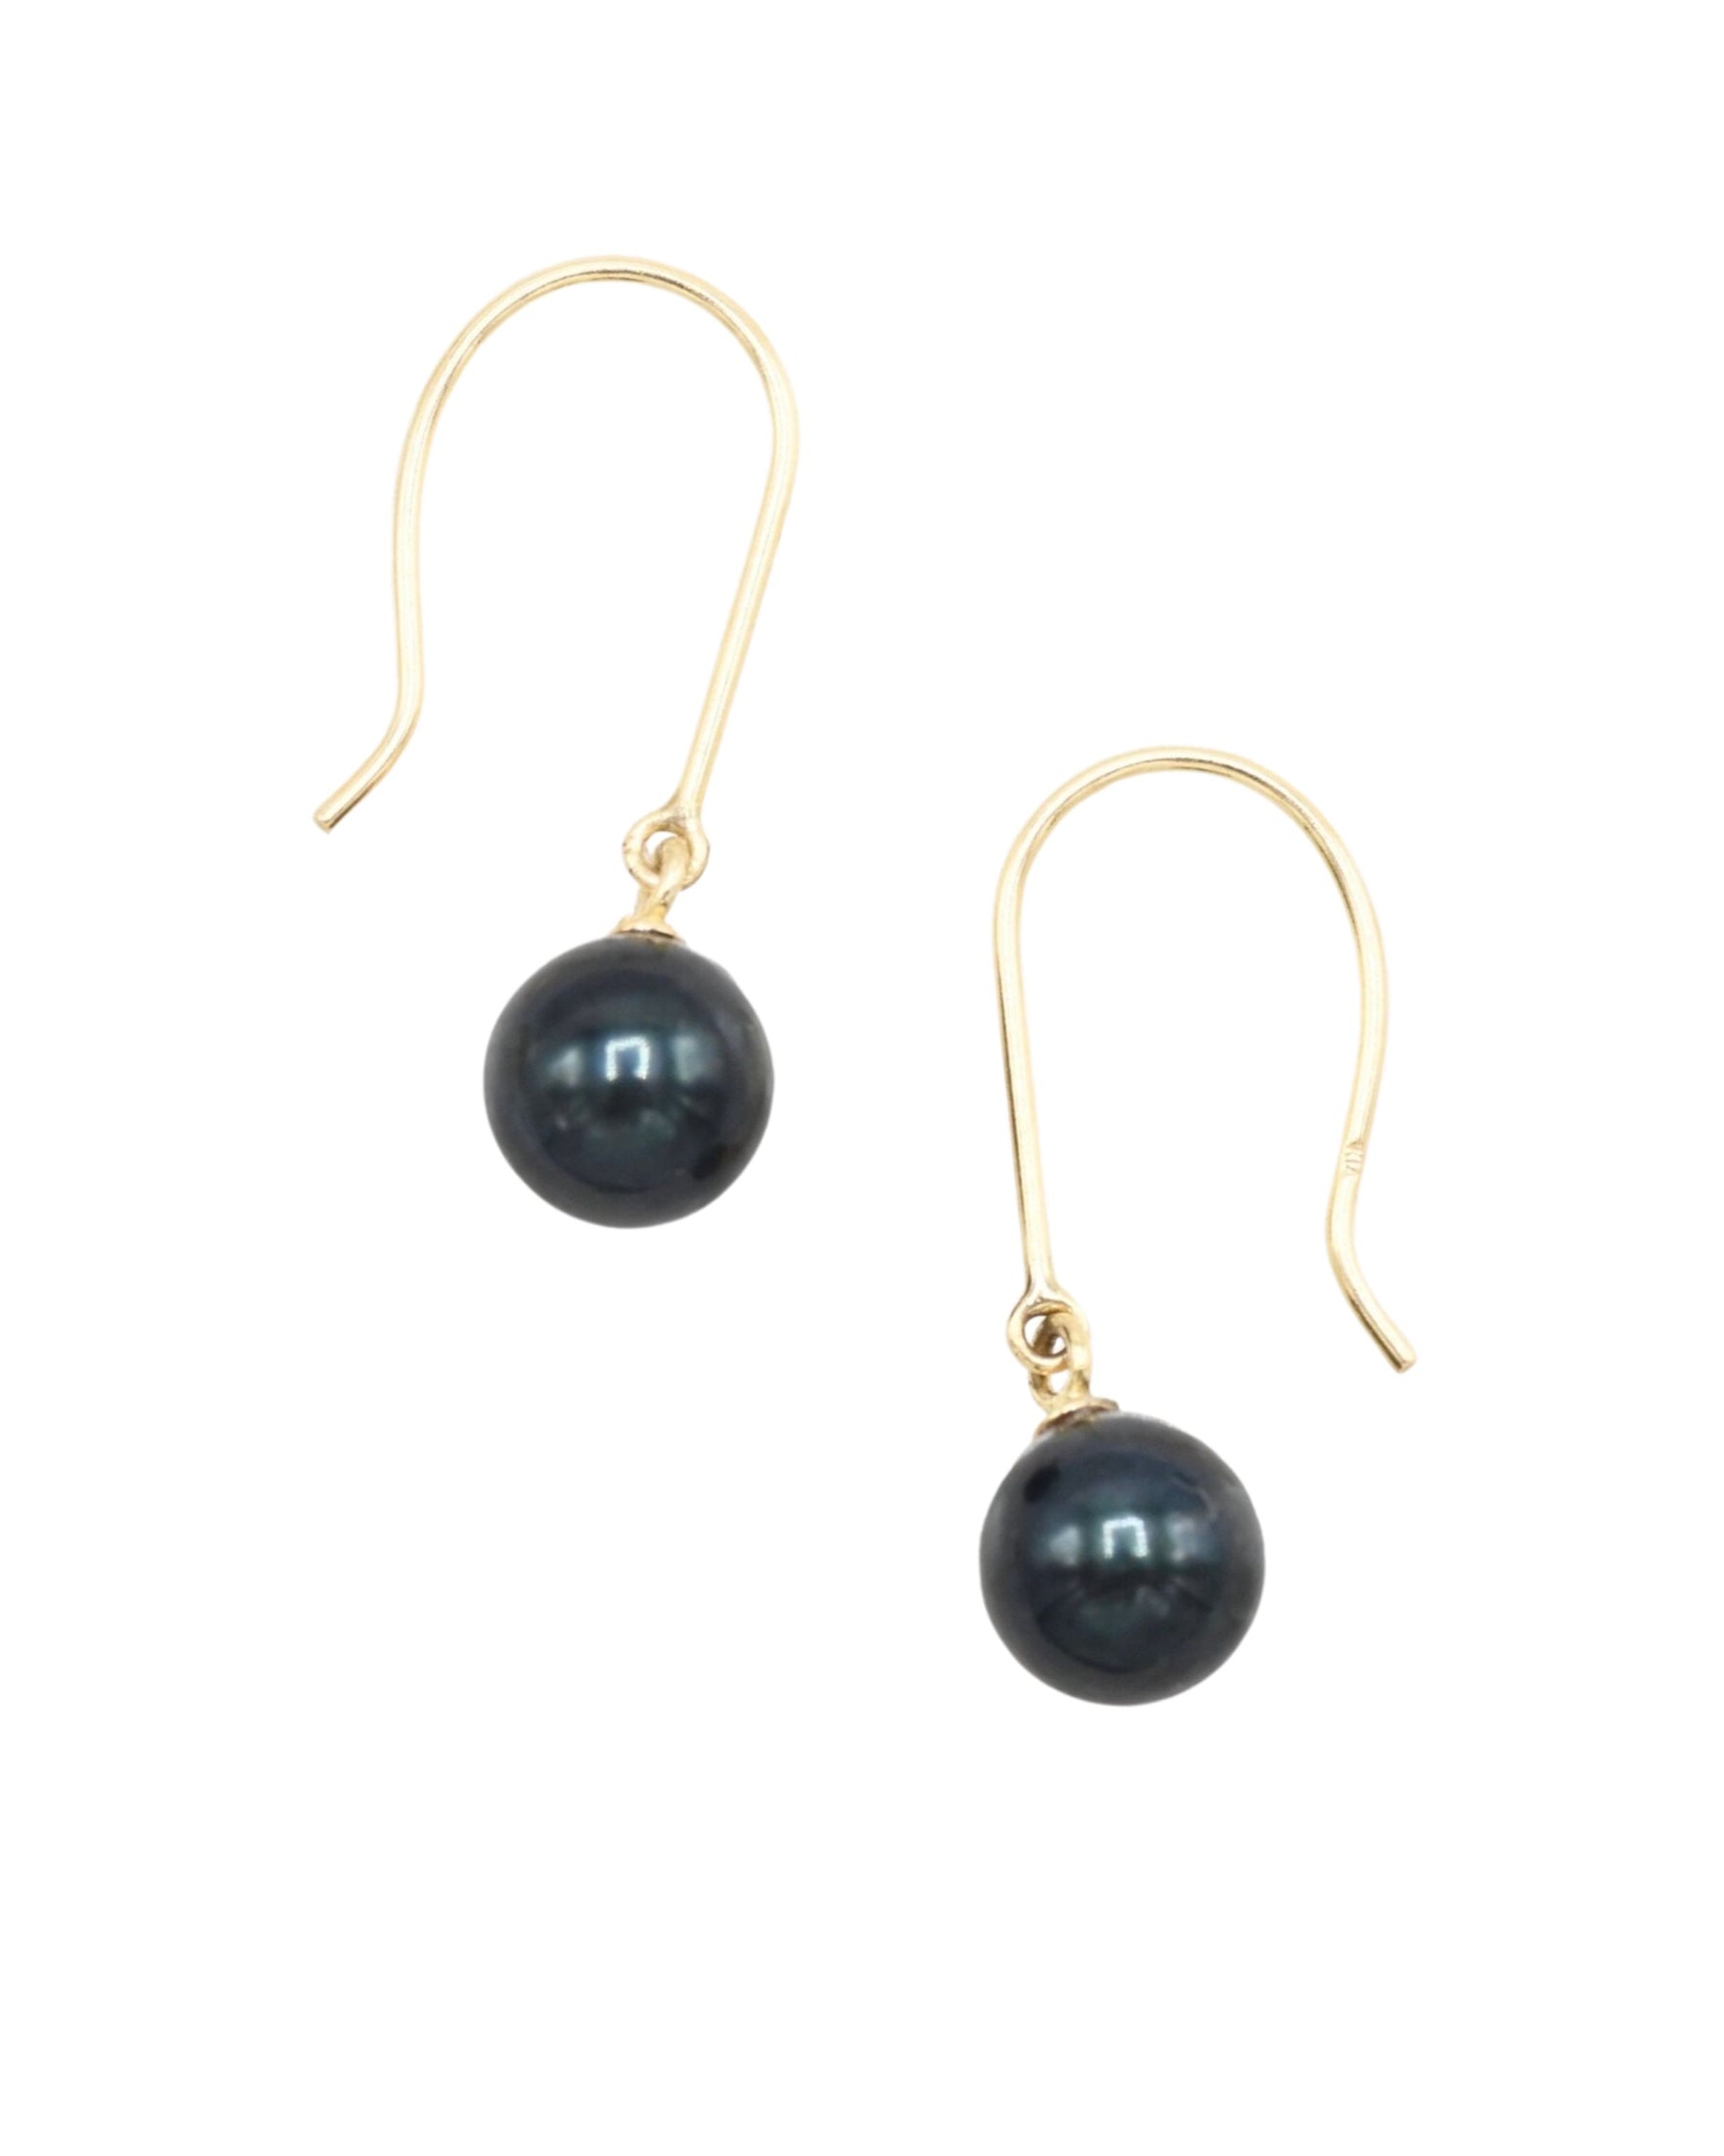 Anapos Earrings - Sculptress